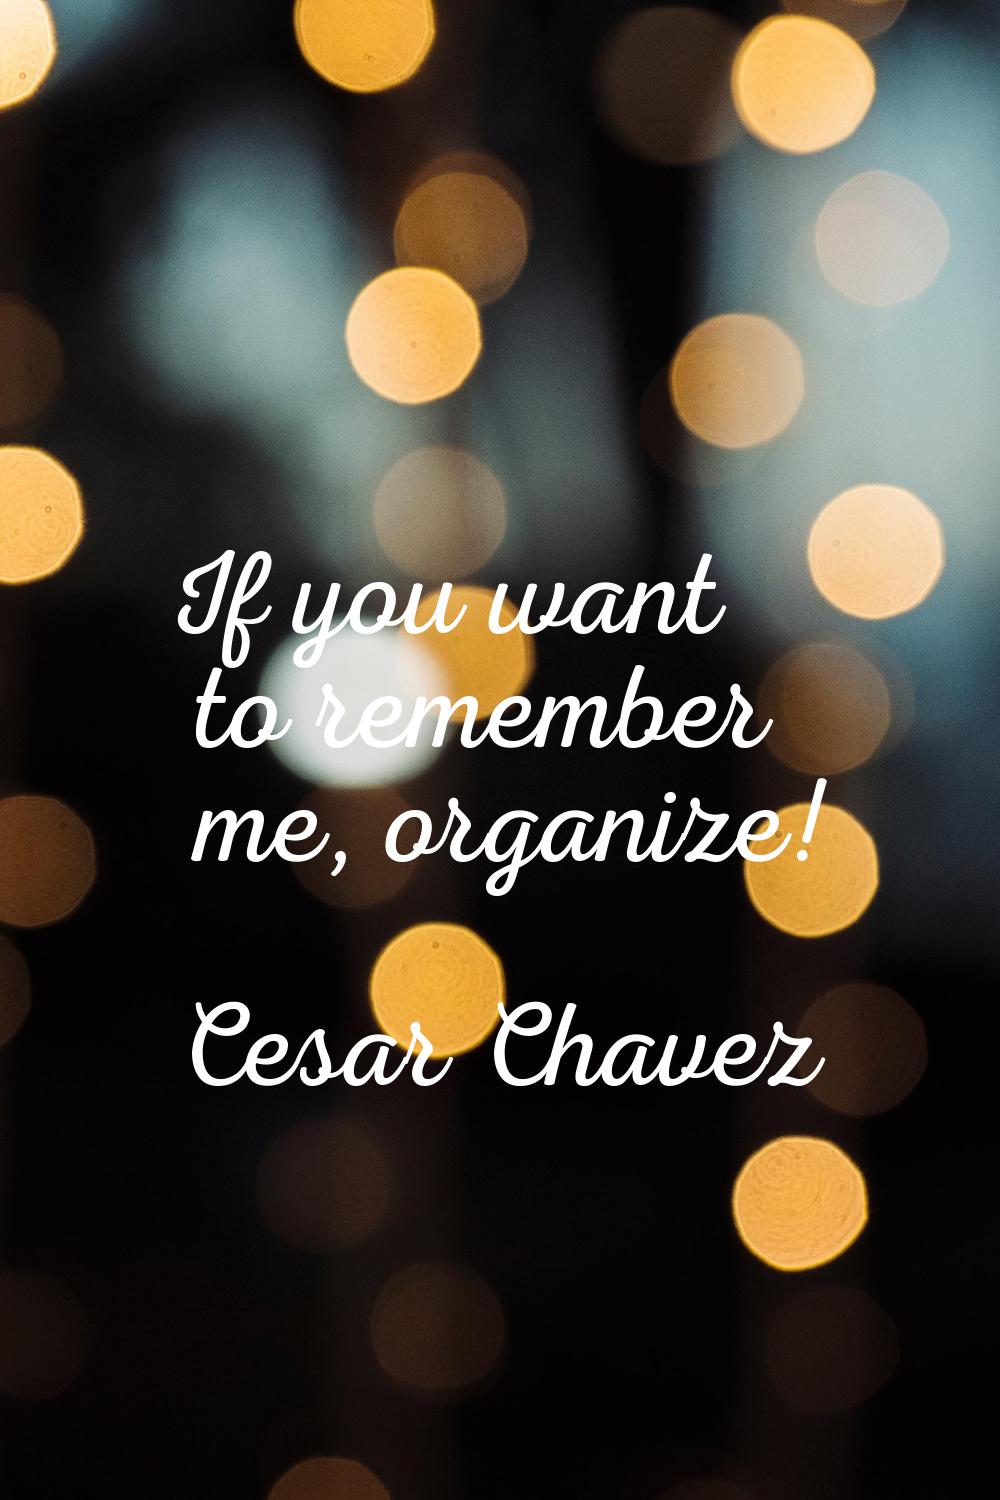 If you want to remember me, organize!